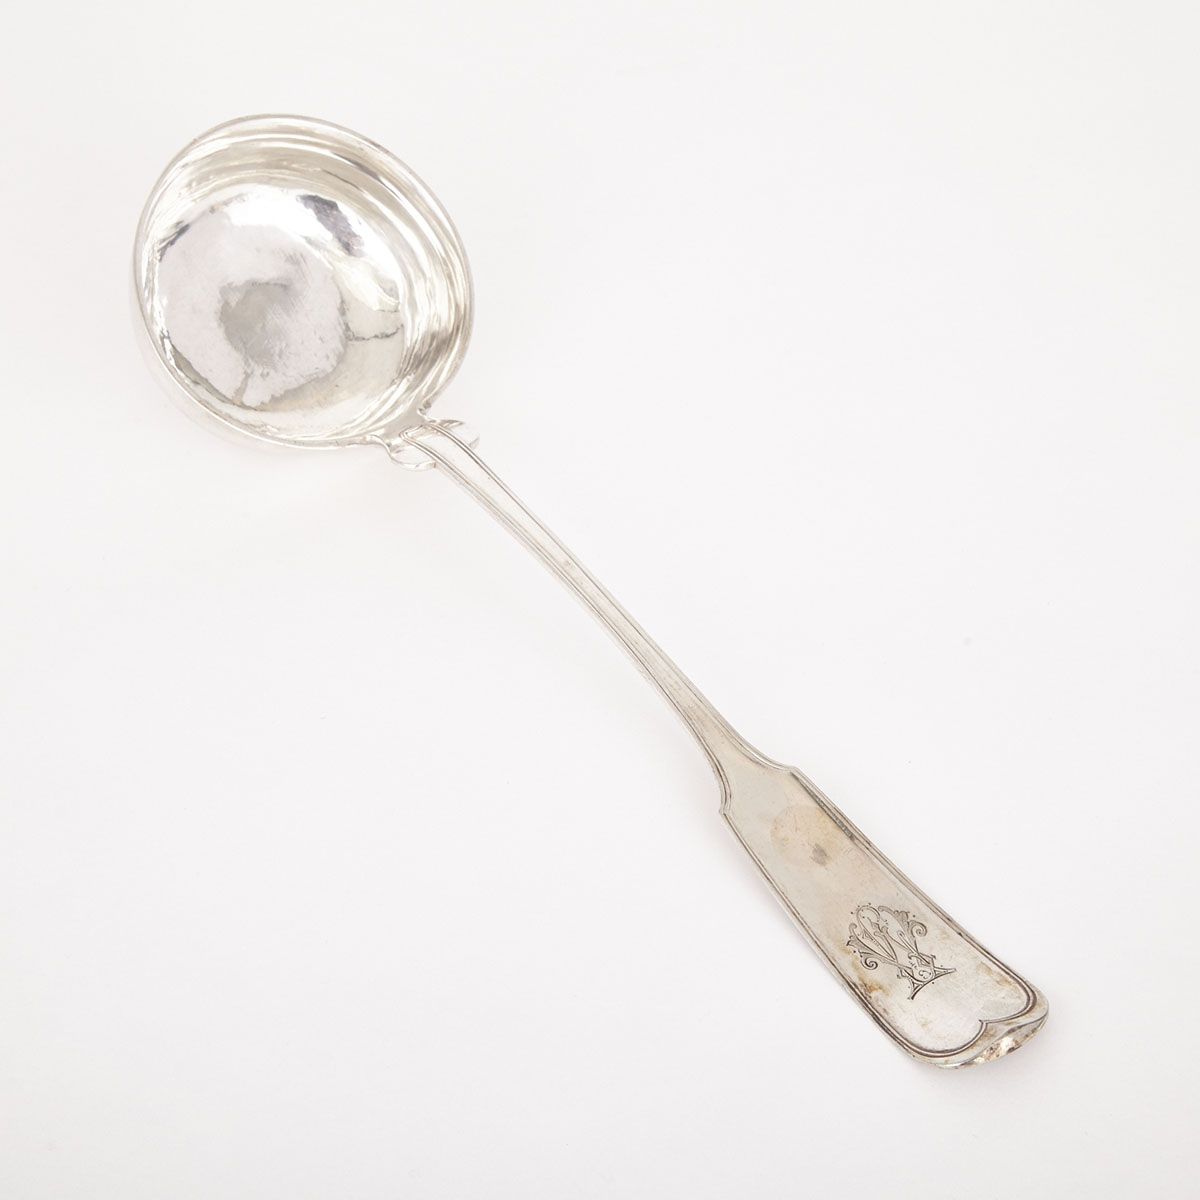 German Silver Fiddle and Thread Pattern Soup Ladle, 19th century